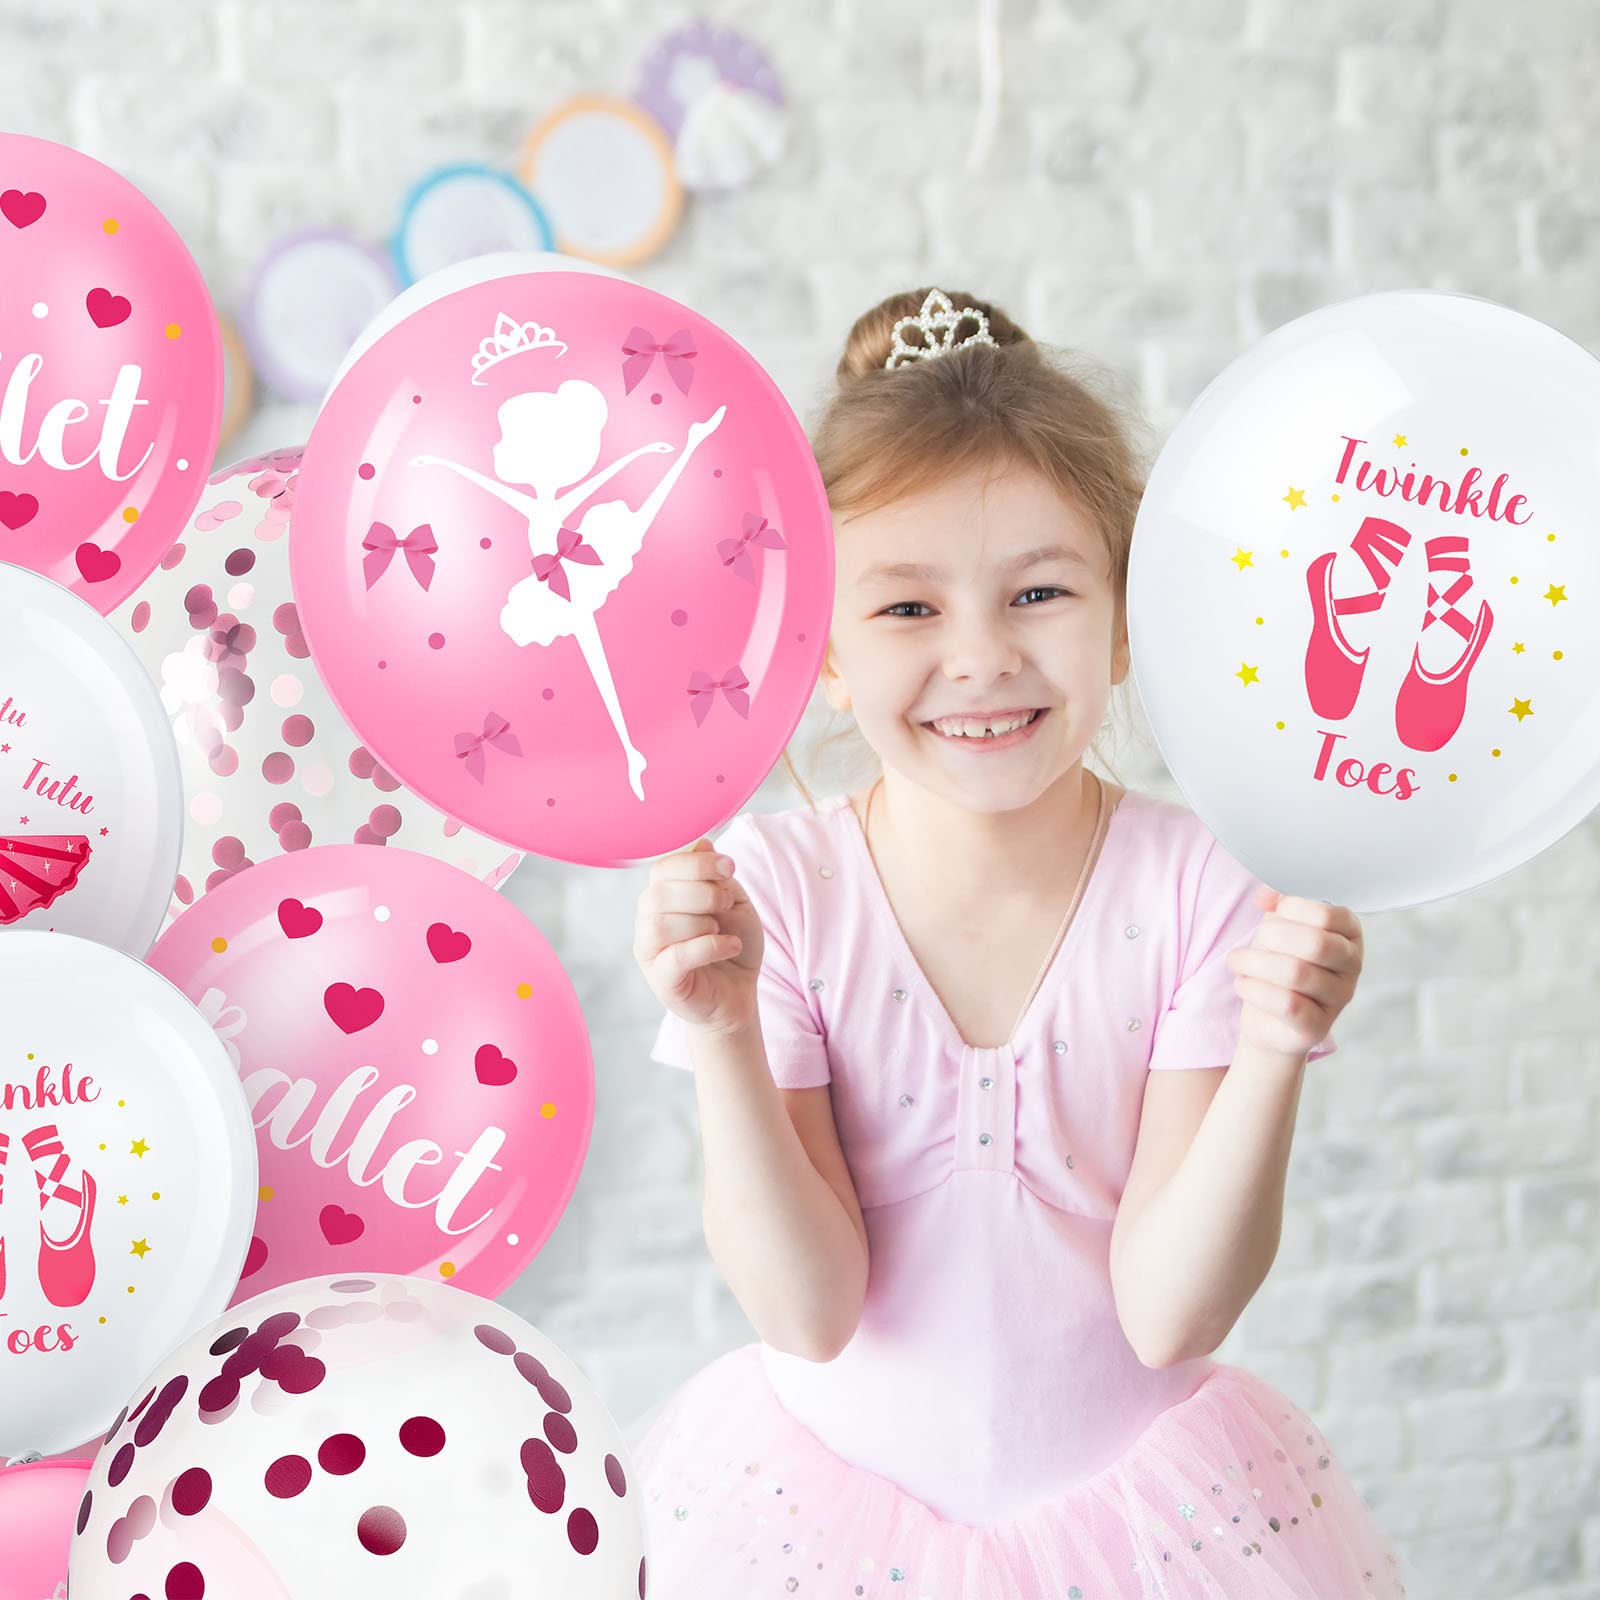 48 Pieces Pink White Confetti Latex Balloons 12 Inch Ballerina Birthday Party Decorations Ballet Balloons Ballerina for Birthday Engagement Wedding Baby Shower Bridal Shower Party Graduation Supplies